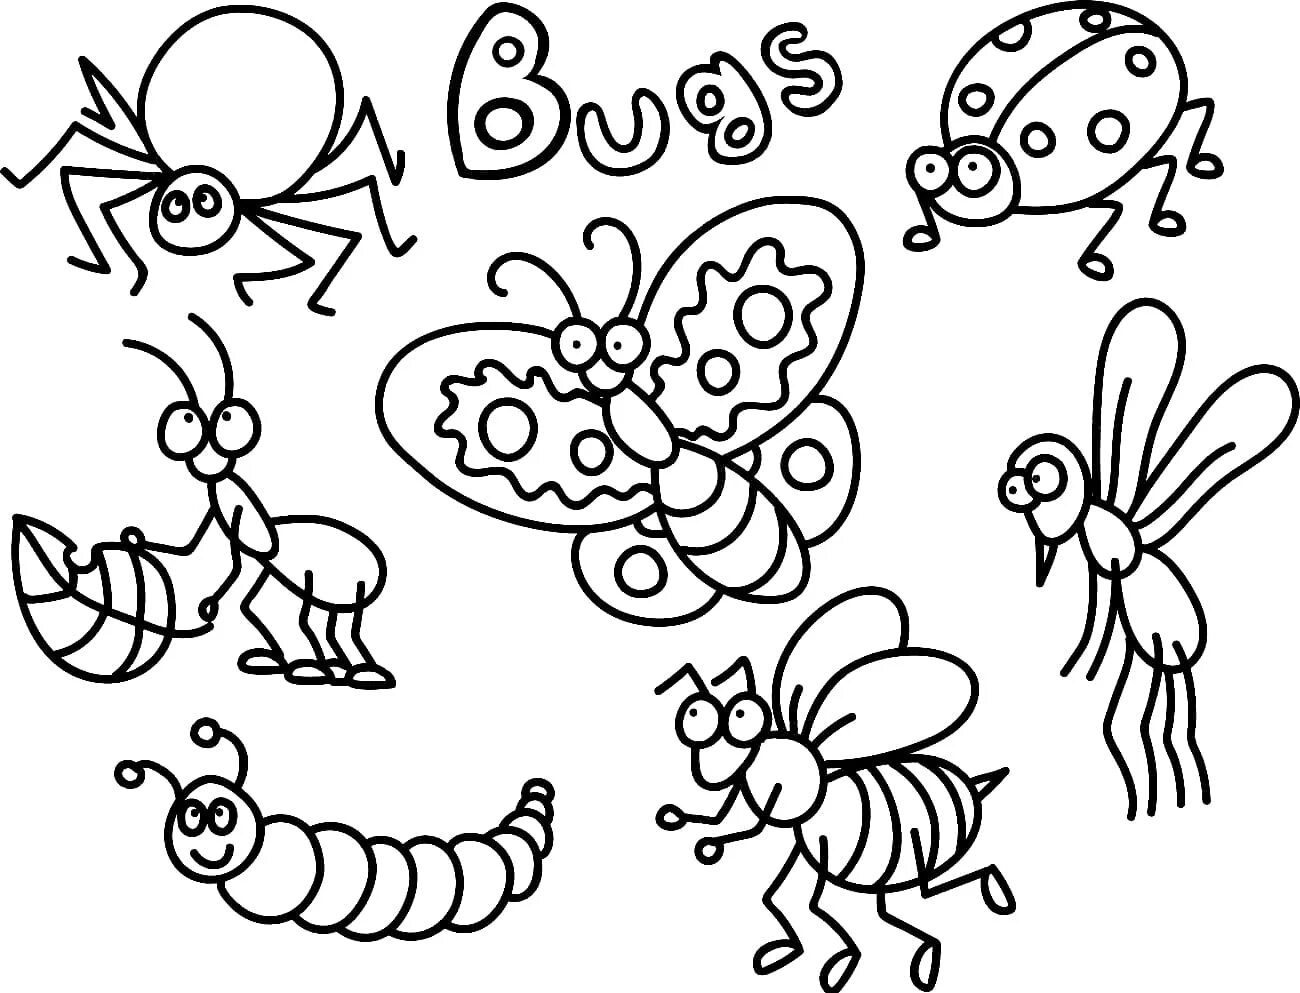 Insects for children 6 7 years old #9